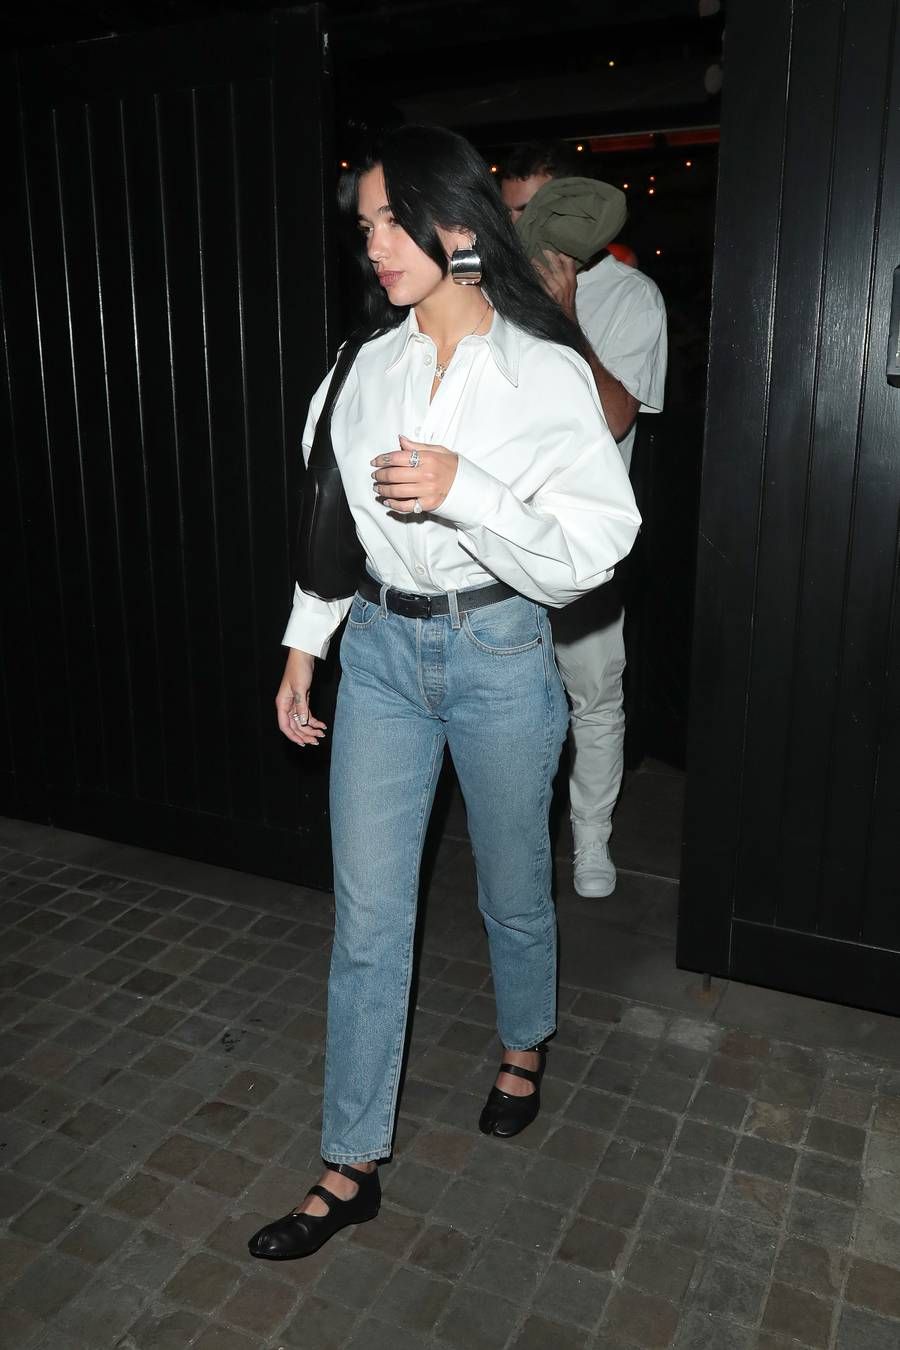 london, england july 21 dua lipa and romain gavras seen on a night out leaving chiltern firehouse on july 21, 2023 in london, england photo by ricky vigil m justin e palmergc images